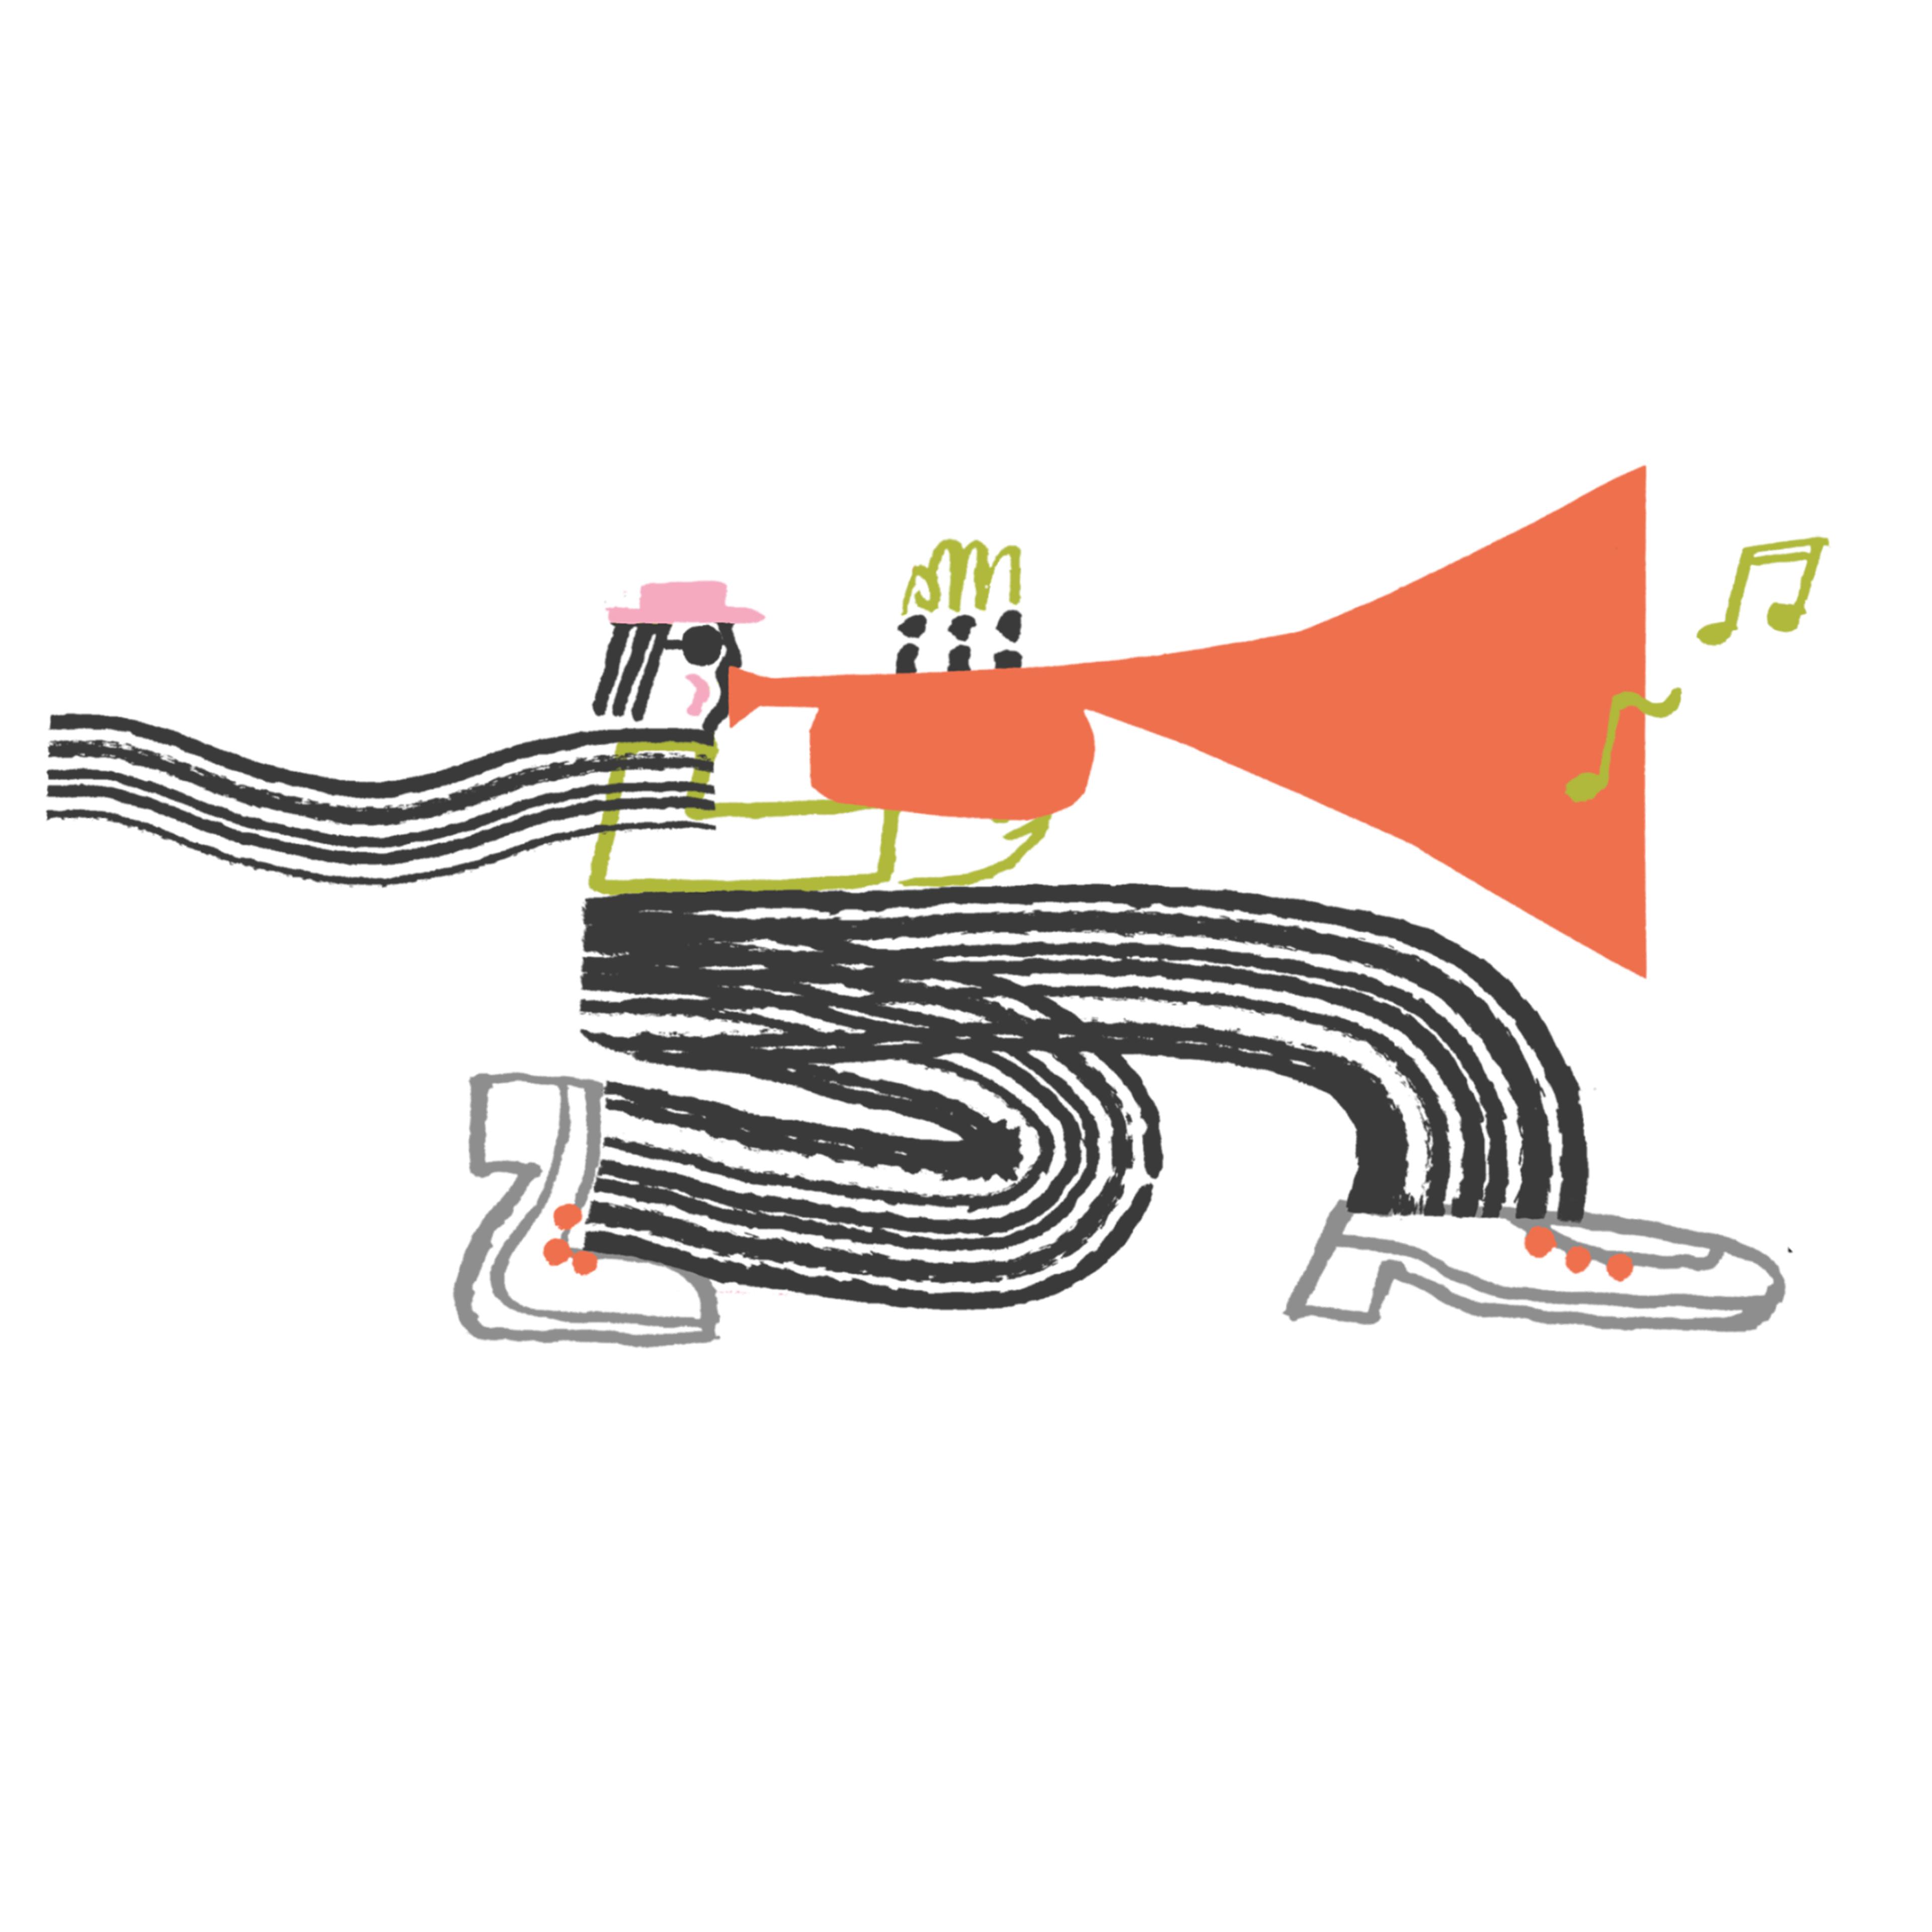 Illustration of a person with long stripy legs blowing a large orange trumpet.